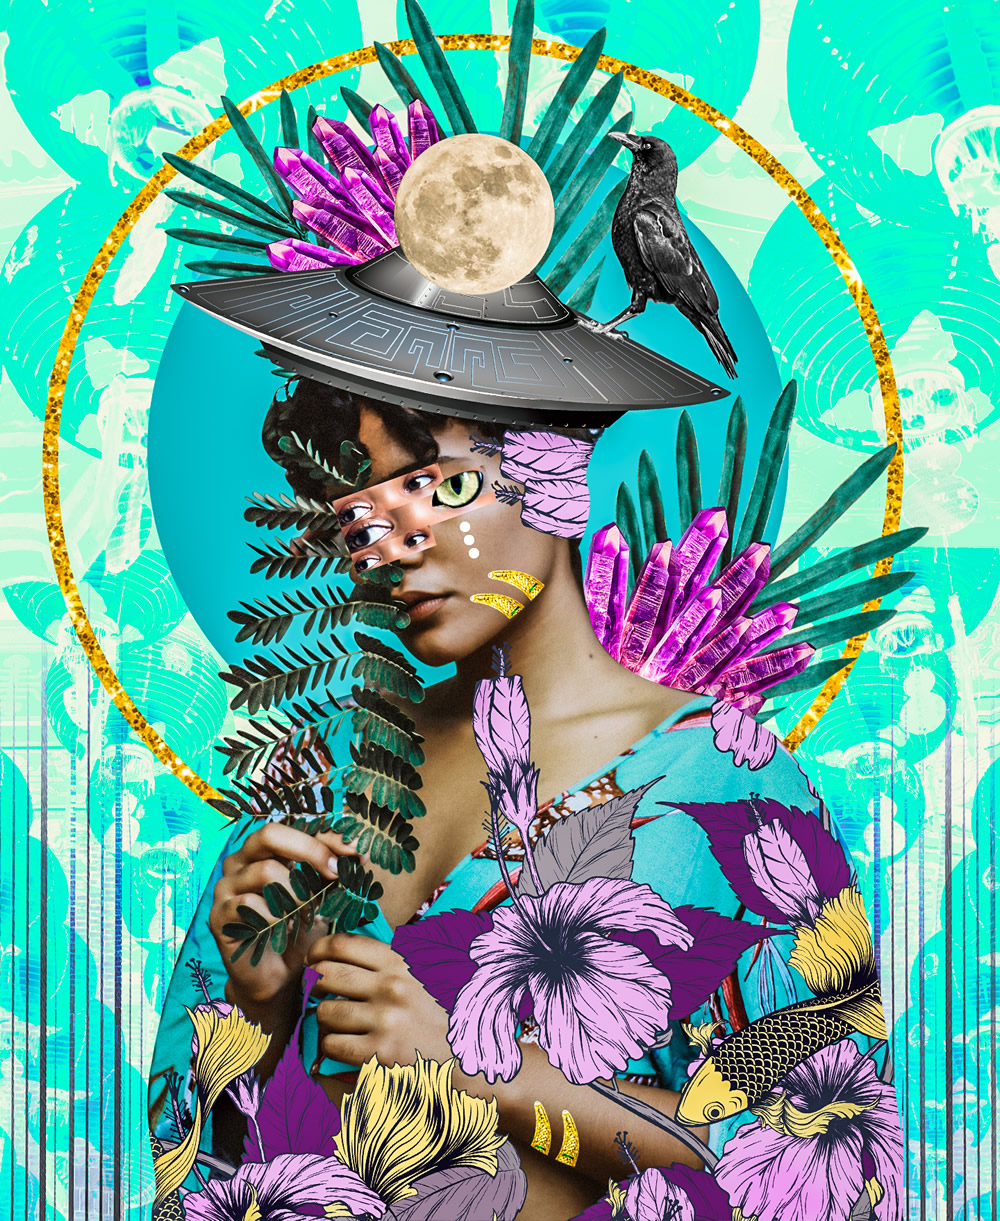 Lost In The Island: Electric and Vivid Collages by Kaylan M